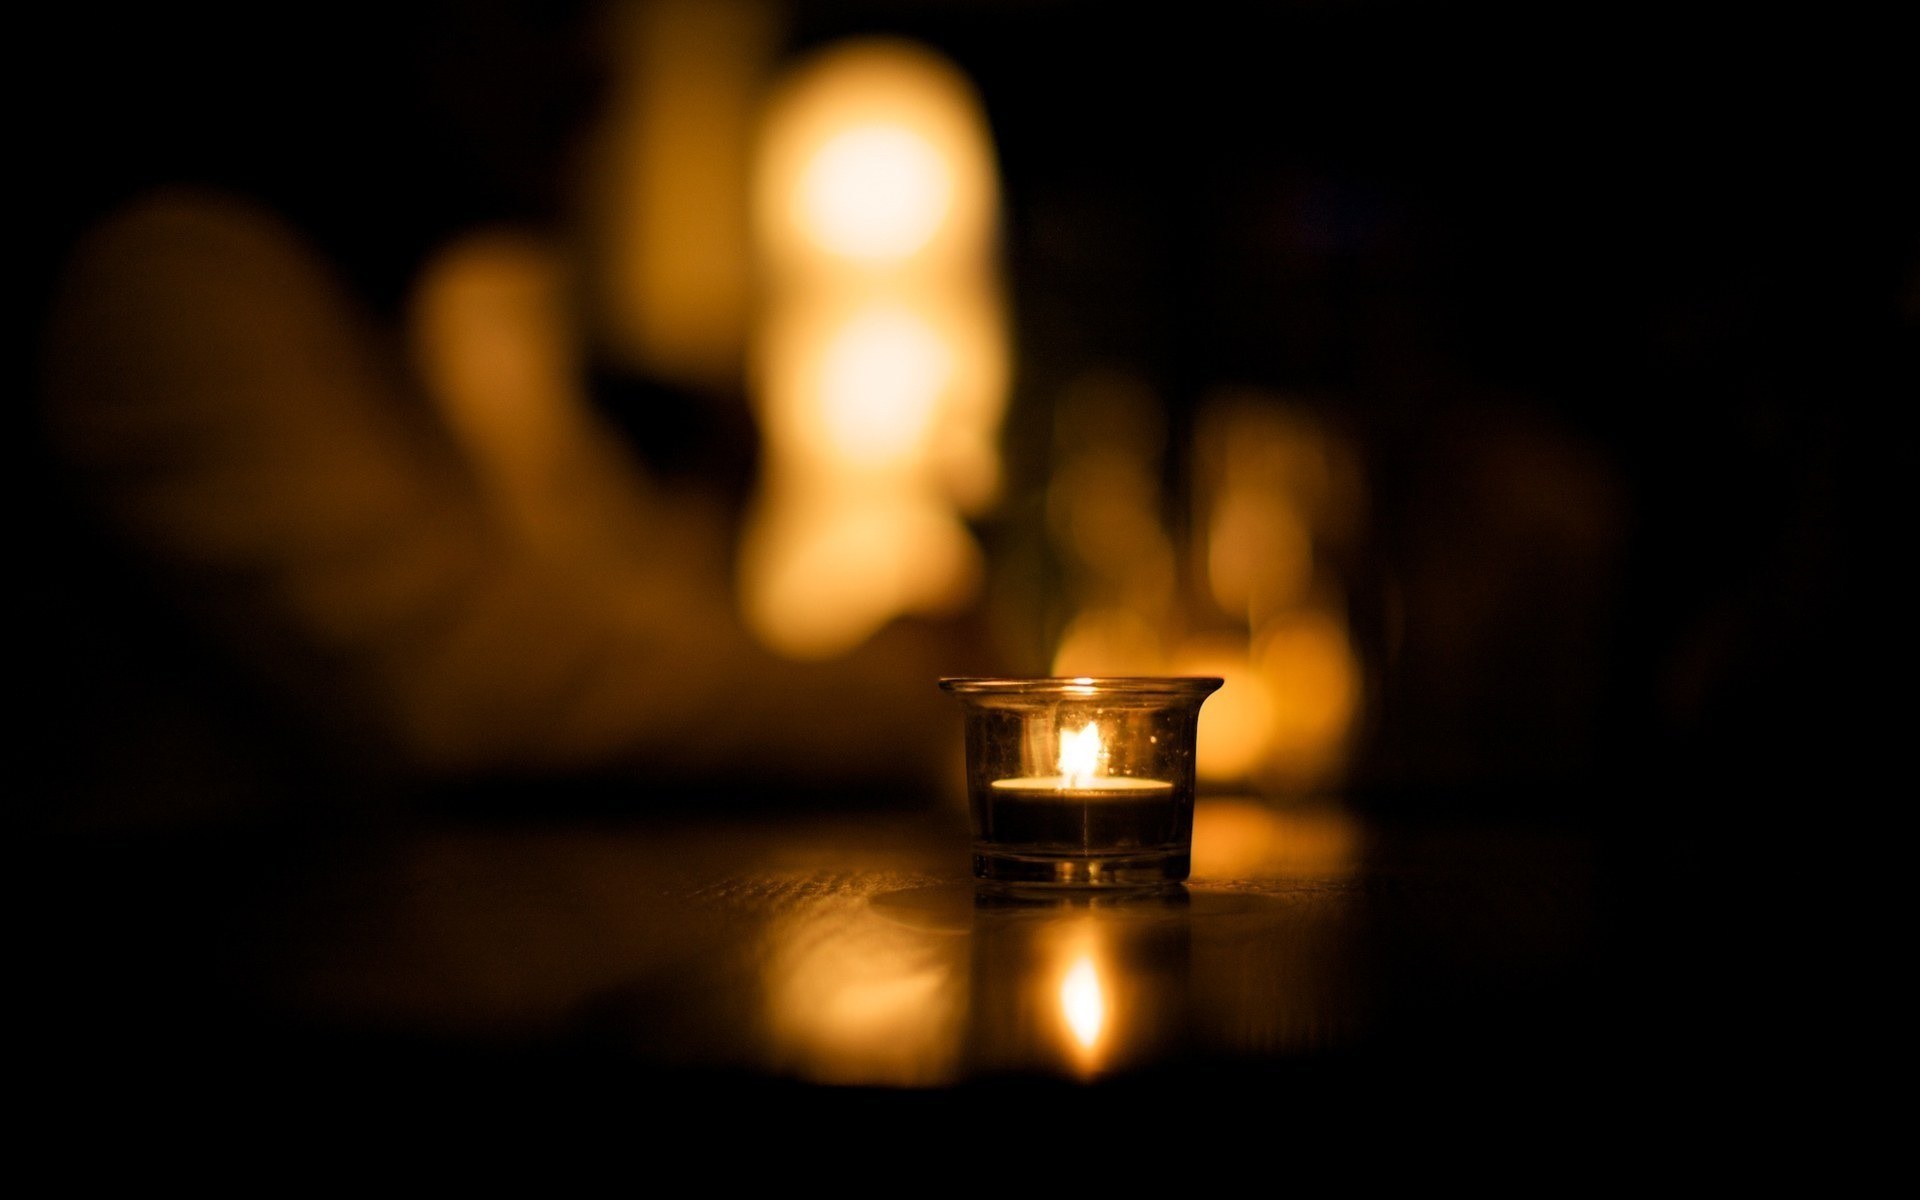 candle wallpaper,darkness,lighting,candle,light,still life photography